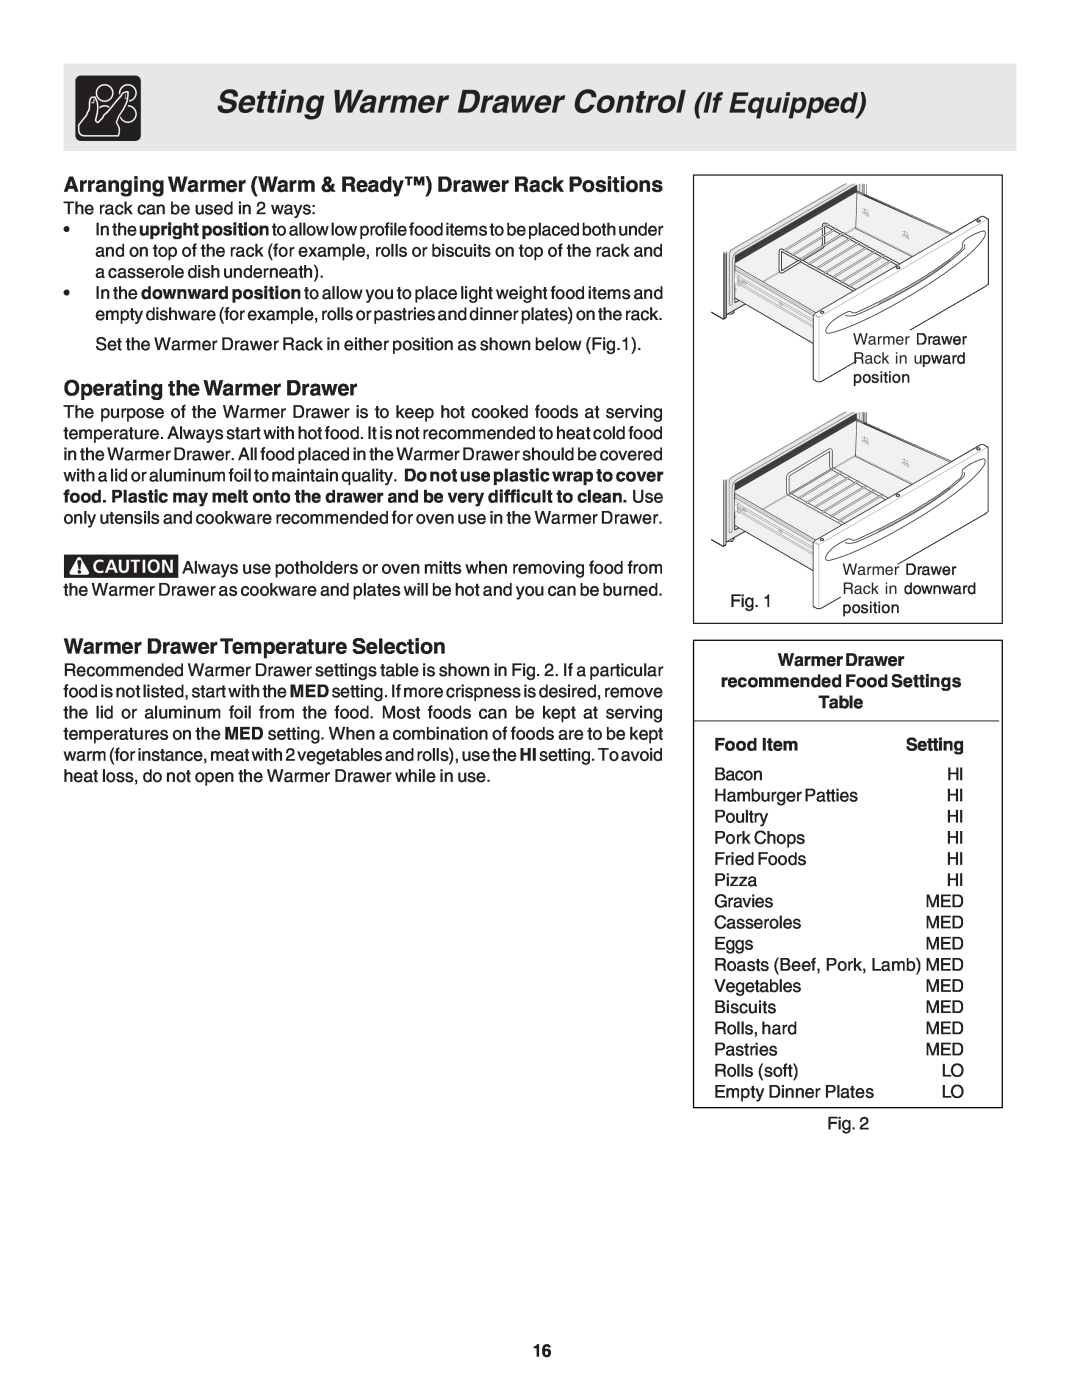 Frigidaire 318203825 warranty Setting Warmer Drawer Control If Equipped, Operating the Warmer Drawer, Food Item 